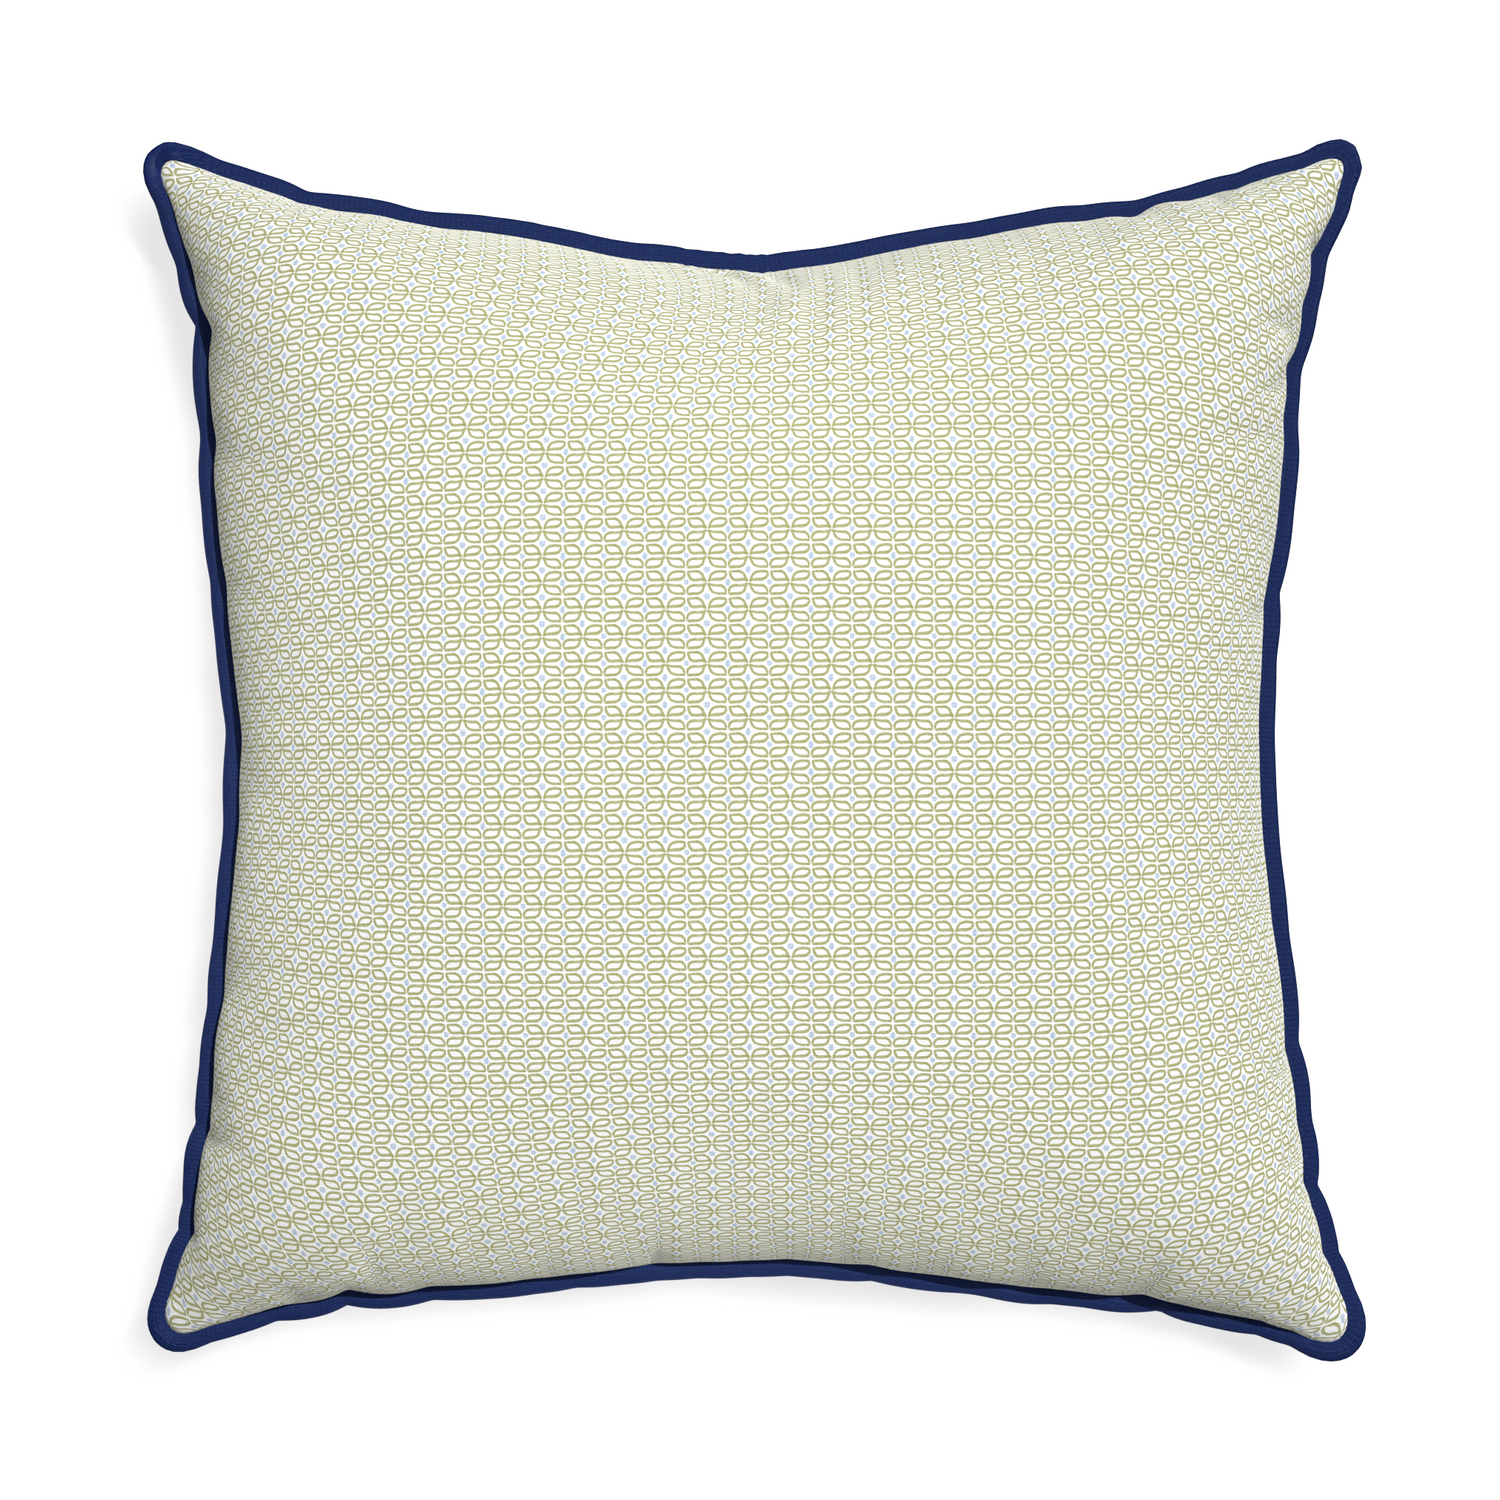 Euro-sham loomi moss custom pillow with midnight piping on white background